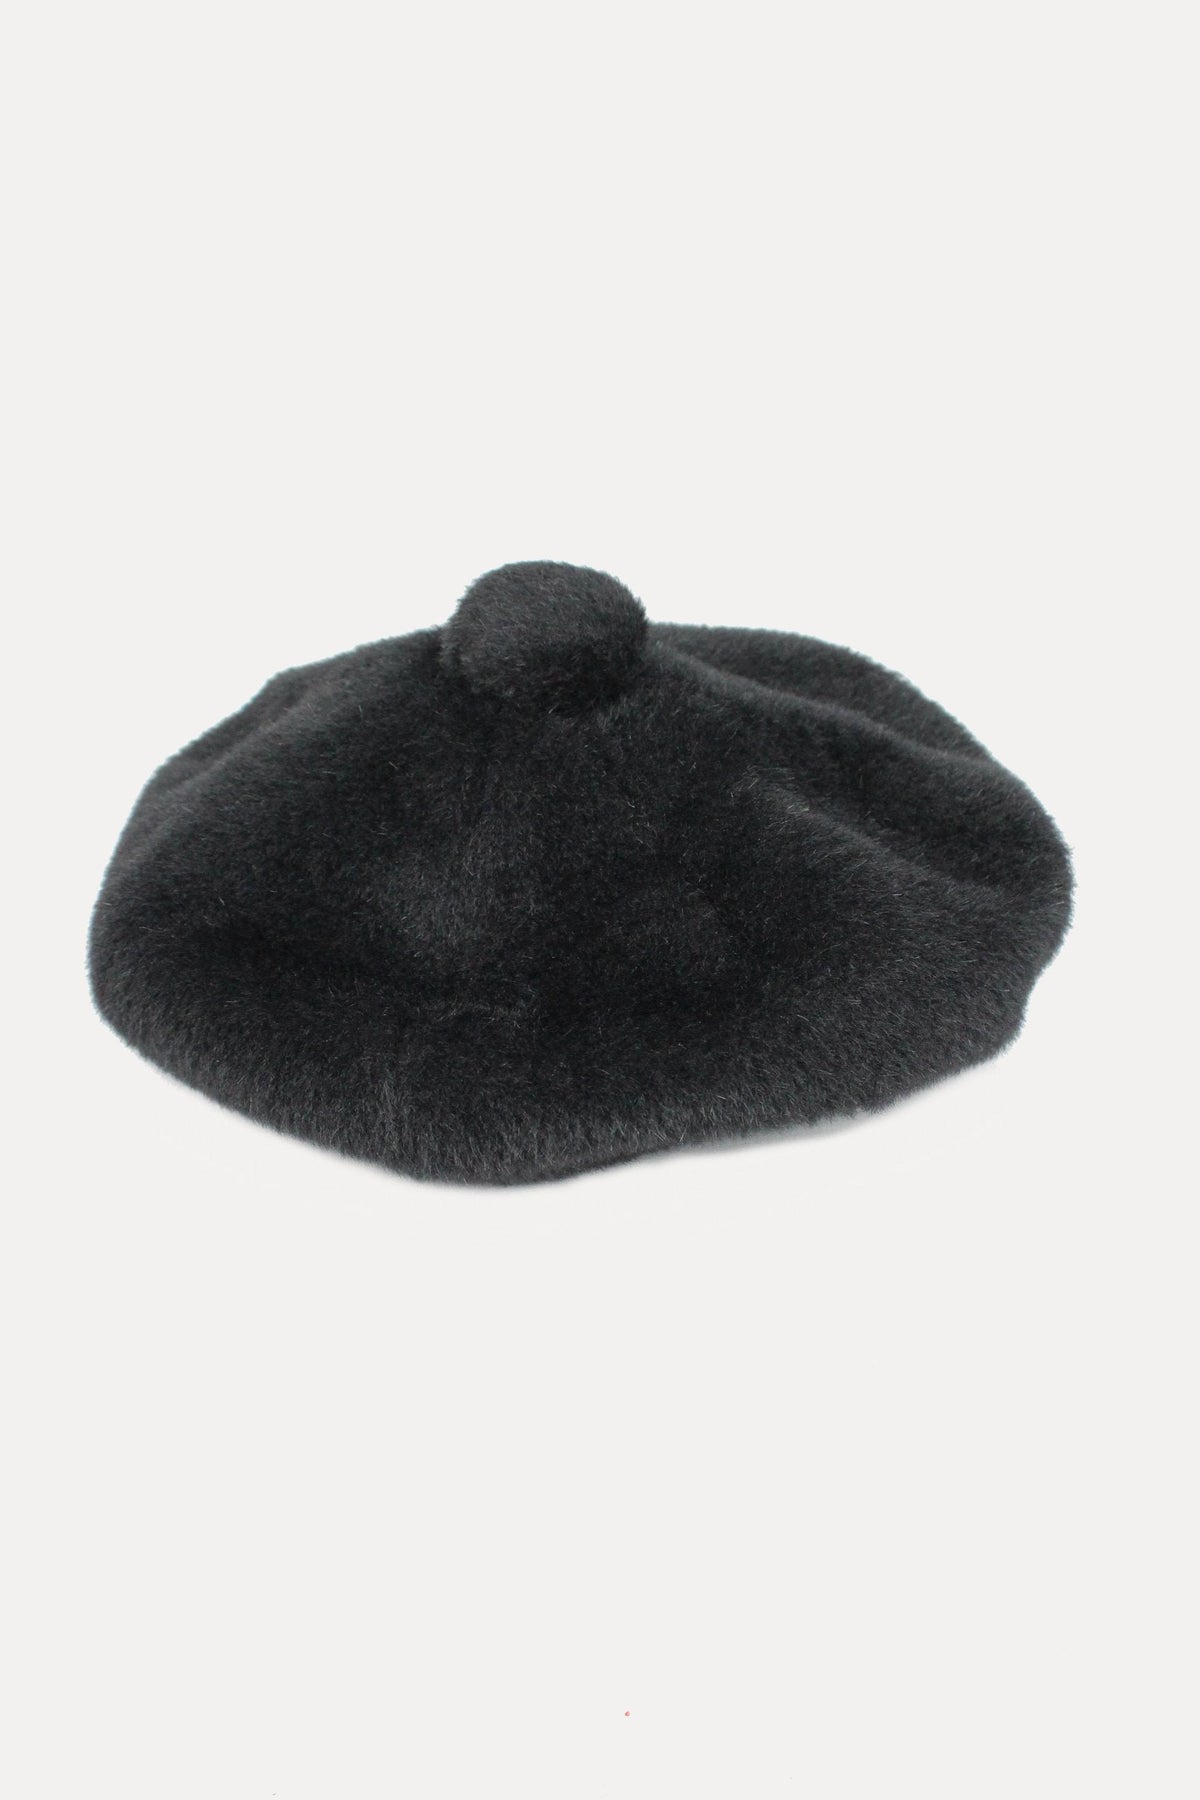 BERET IN BLACK ALPACA-hats-A Child Of The Jago